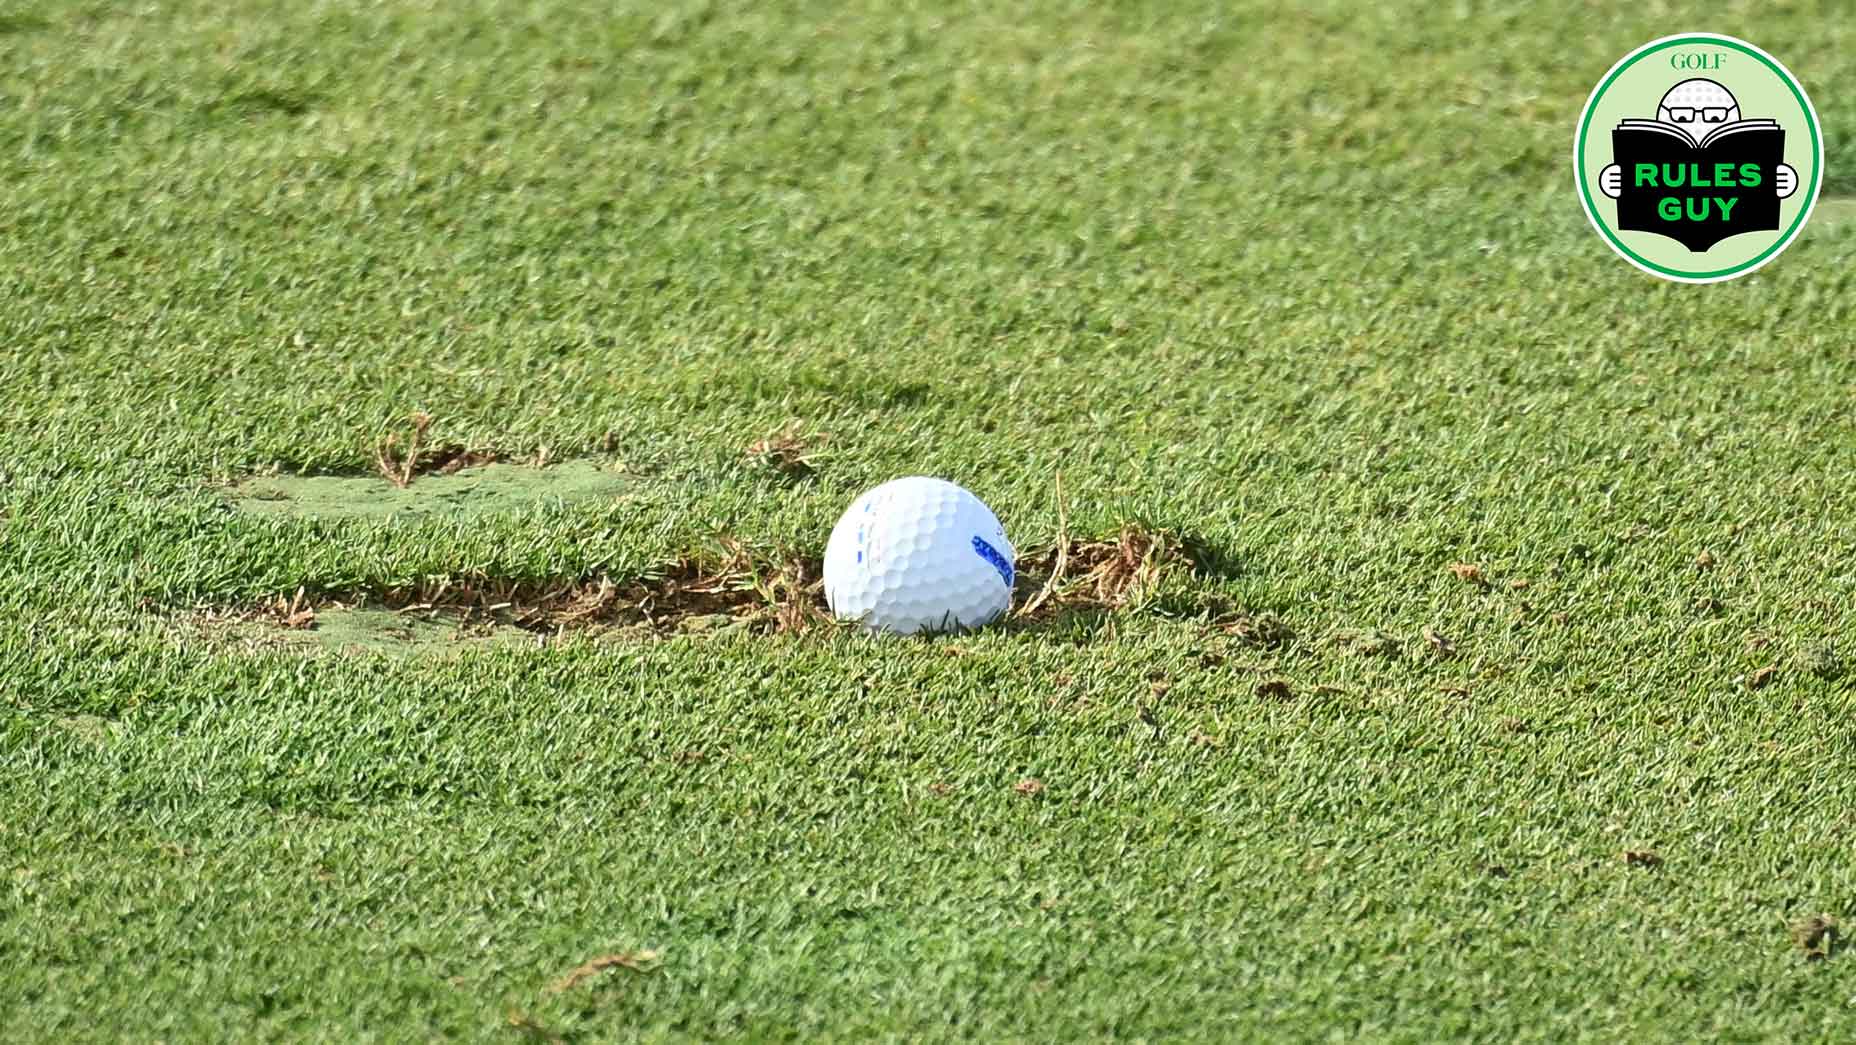 A golf ball in a divot on the sixteenth fairway during the Second Round of the Abu Dhabi HSBC Championship at Yas Links Golf Course on January 21, 2022 in Abu Dhabi, United Arab Emirates.